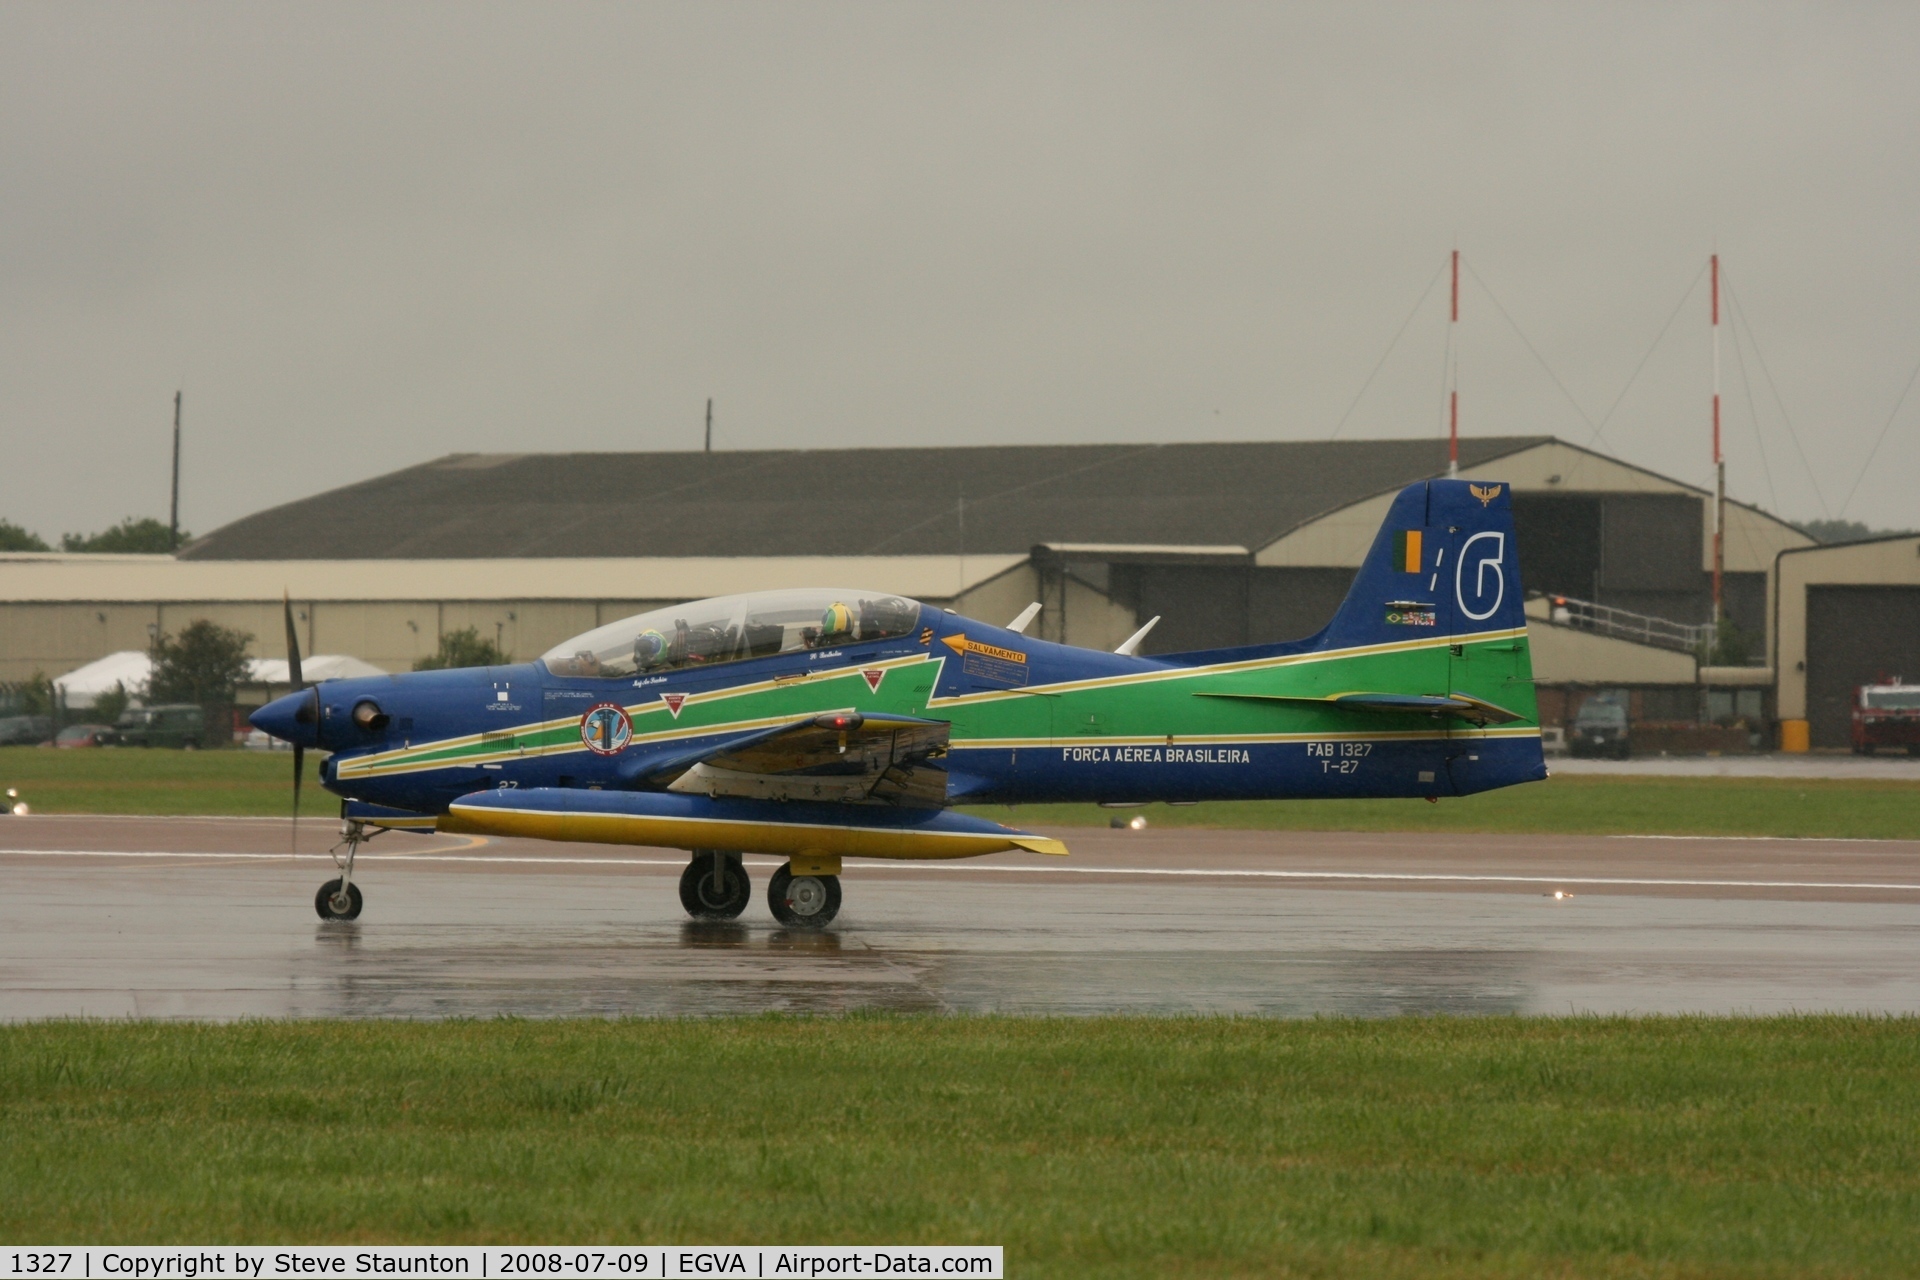 1327, Embraer T-27 Tucano (EMB-312) C/N 312031, Taken at the Royal International Air Tattoo 2008 during arrivals and departures (show days cancelled due to bad weather)